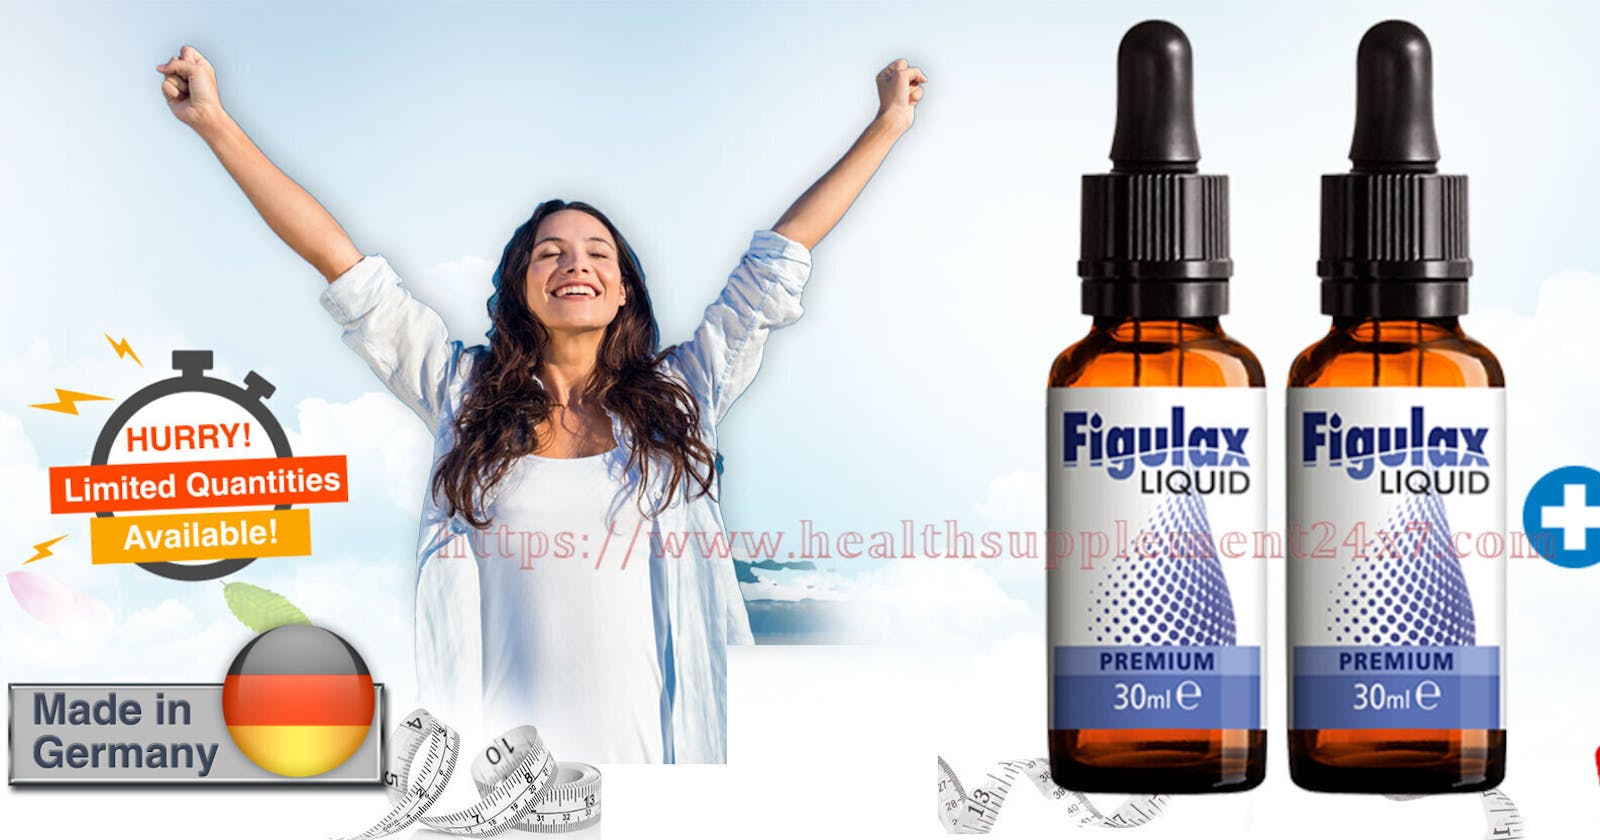 Figulax Liquid [#1 Premium Dietary Supplement] To Achieve Weight And Fat Loss In Safe Way 2023 Report(Spam Or Legit)